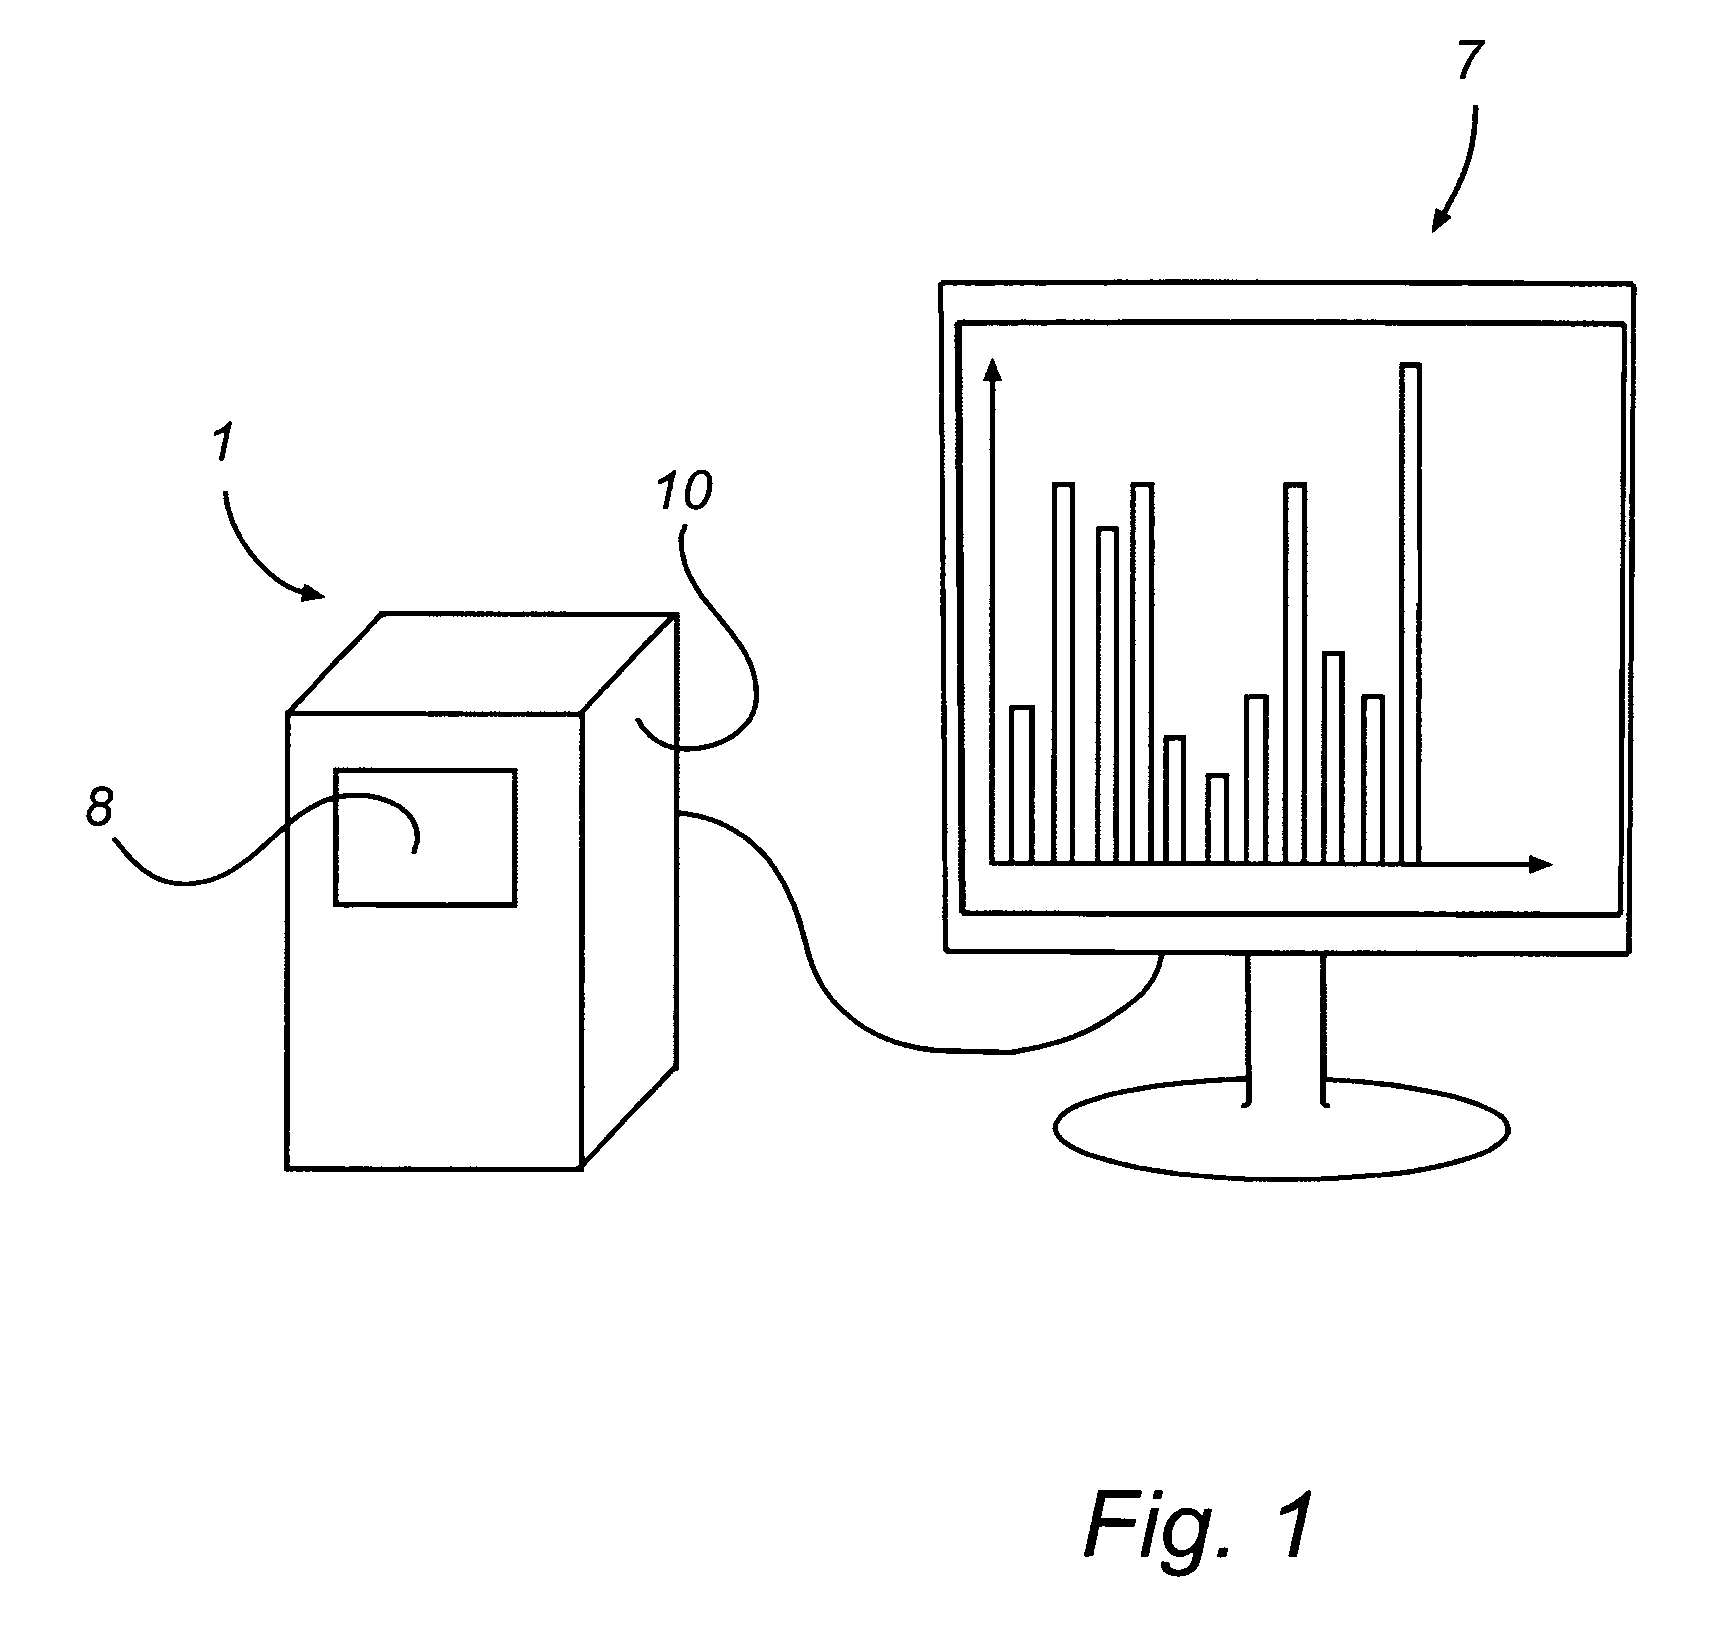 Apparatus and method for X-ray fluorescence analysis of a mineral sample